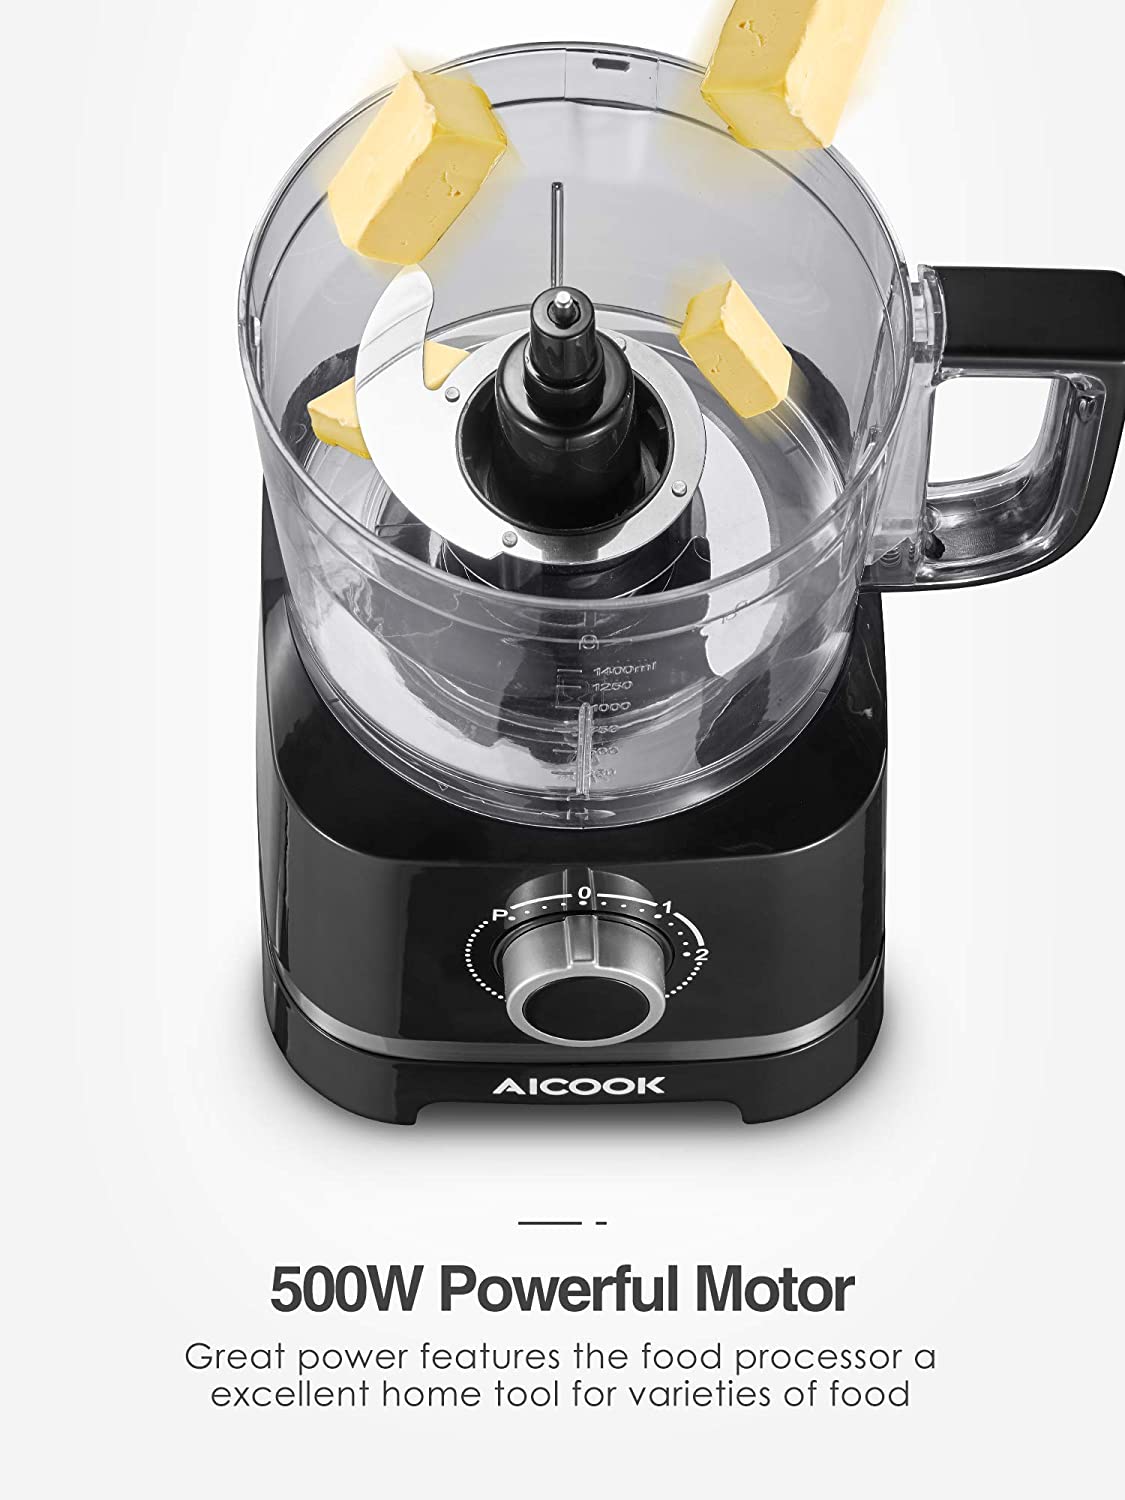 AICOOK | Food Processor, 12-Cup Food Chopper with 16 Functions, 500W Powerful Motor, 4 Speeds Vegetable Chopper for Chopping, Pureeing, Mixing, Shredding, Whisking Eggs and Slicing